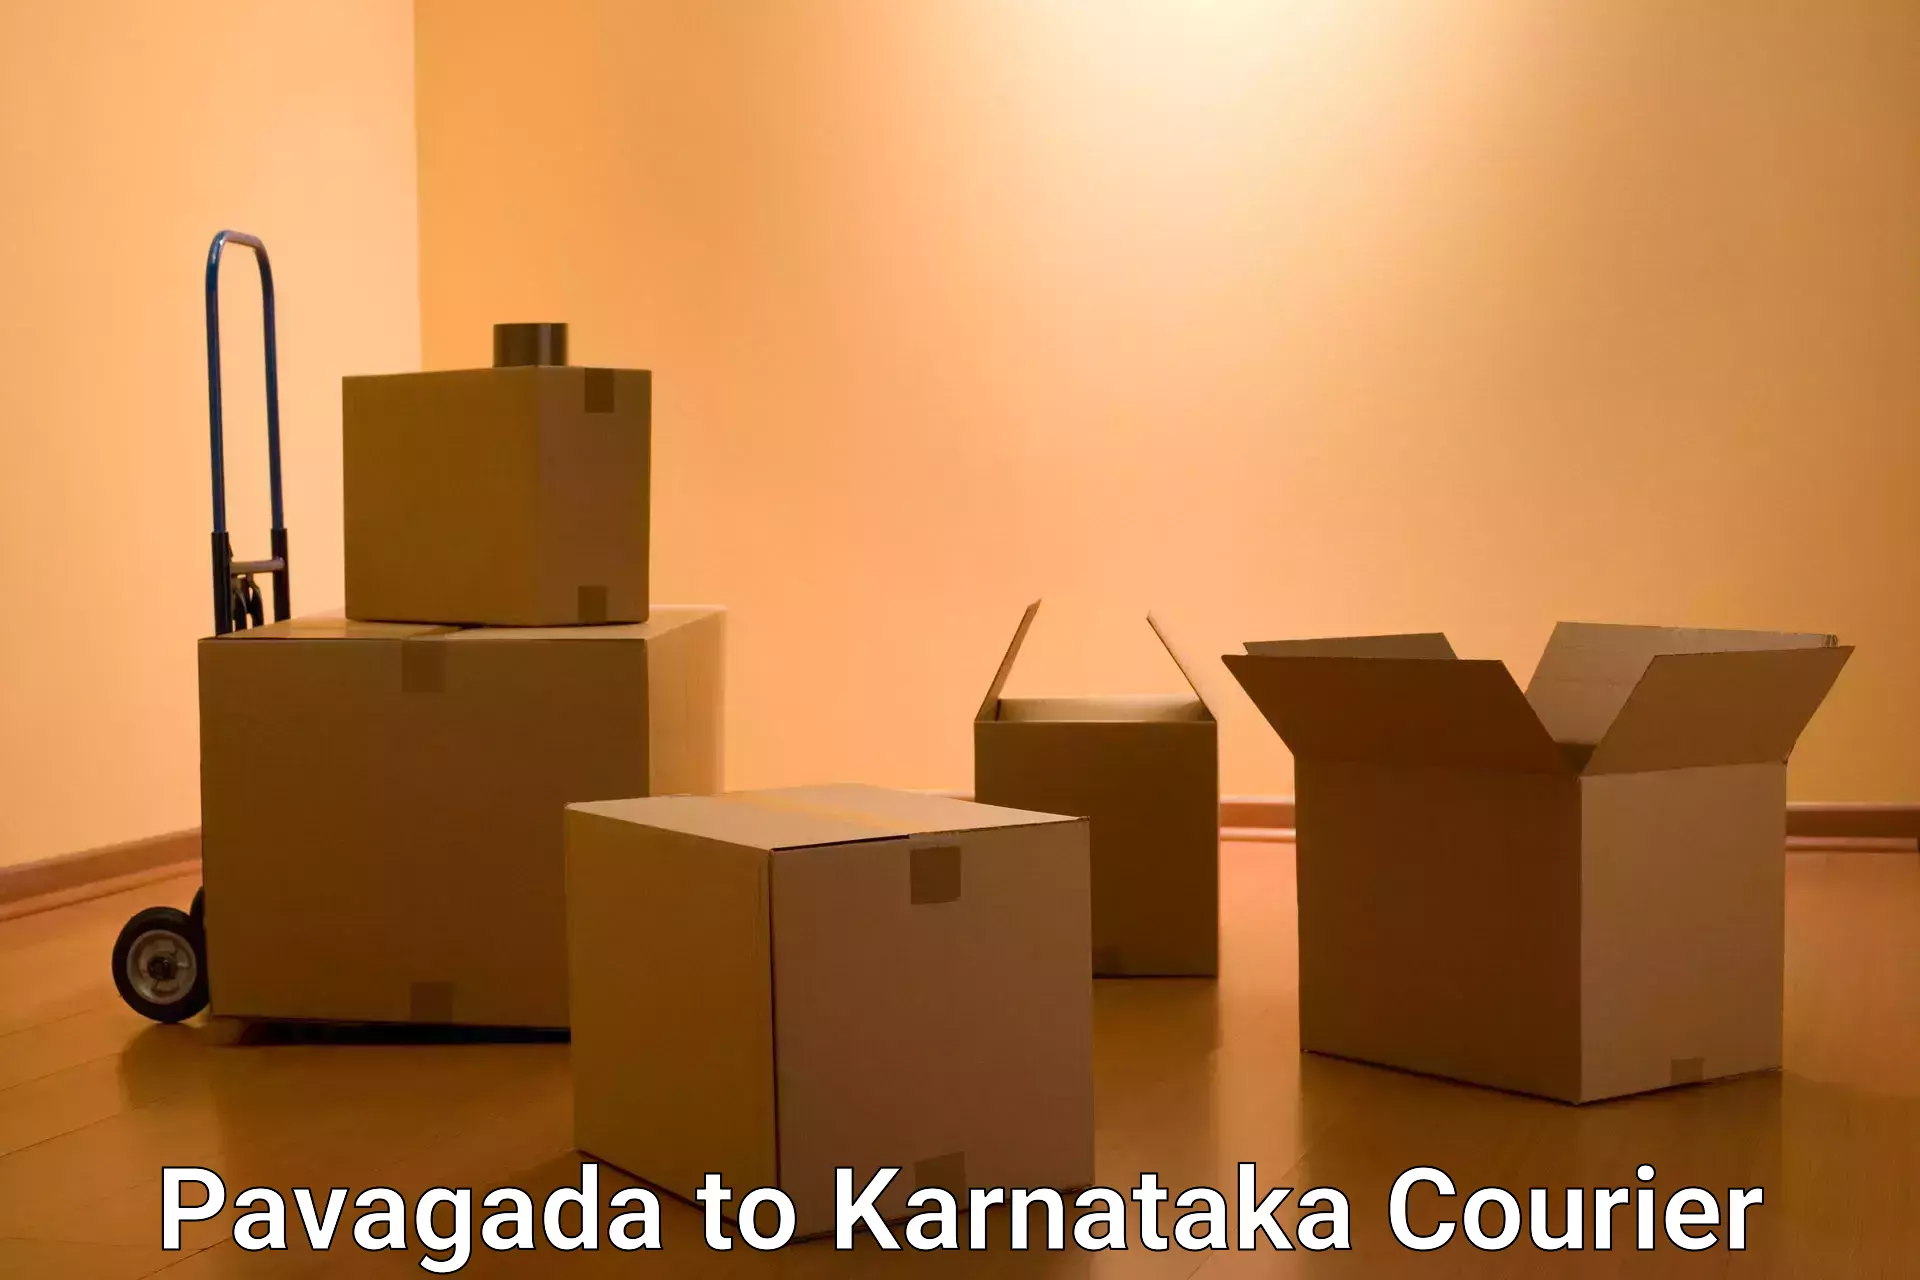 Reliable delivery network Pavagada to Channapatna